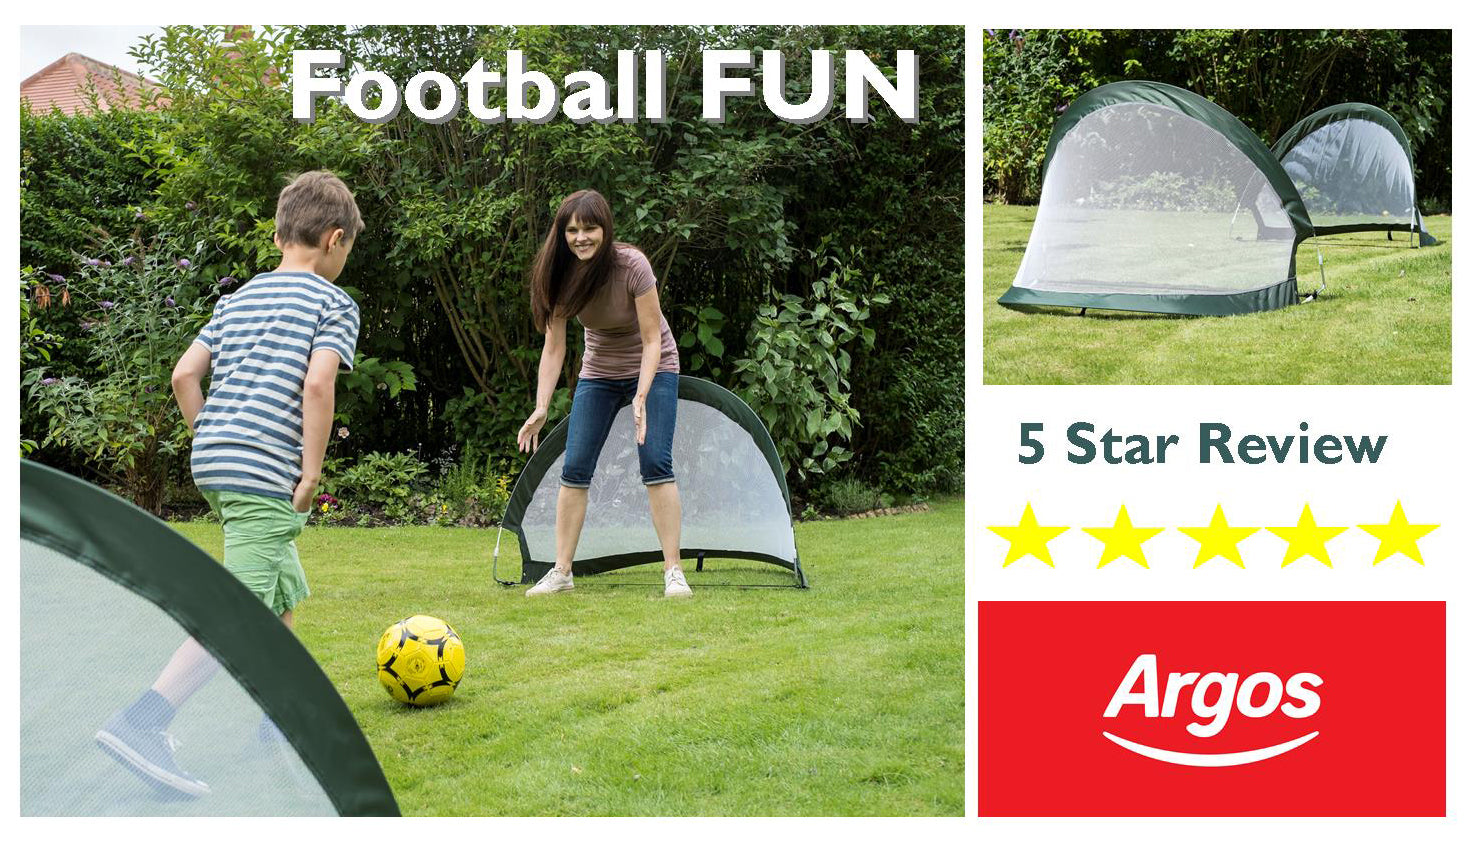 5 Star Review for our 2 in 1 Pop Up Goals